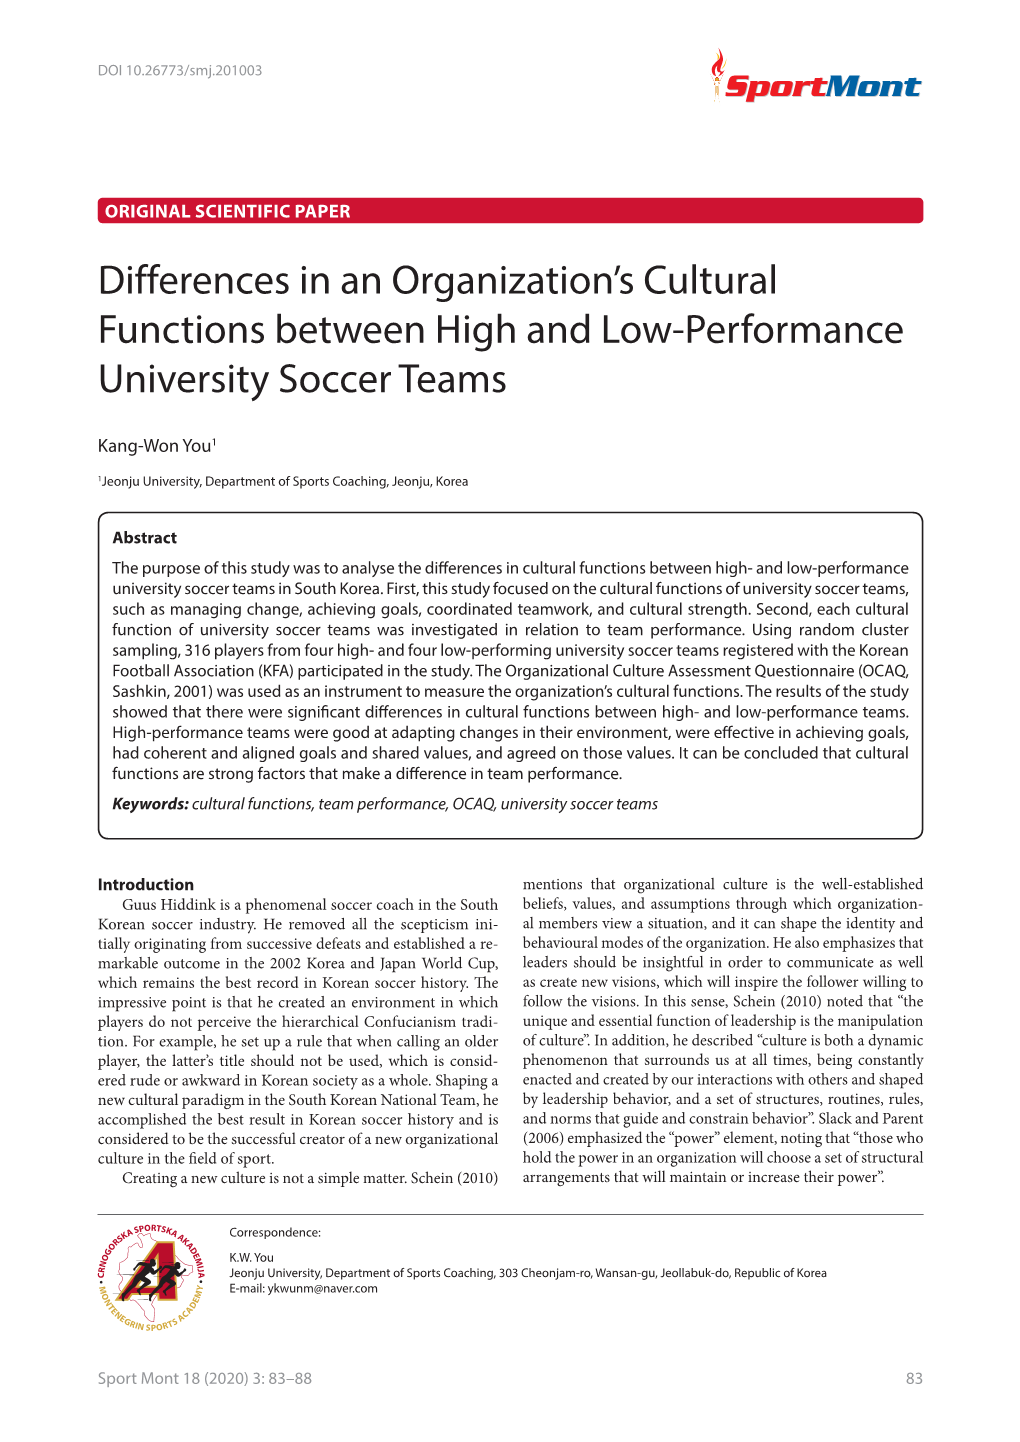 Differences in an Organization's Cultural Functions Between High and Low-Performance University Soccer Teams